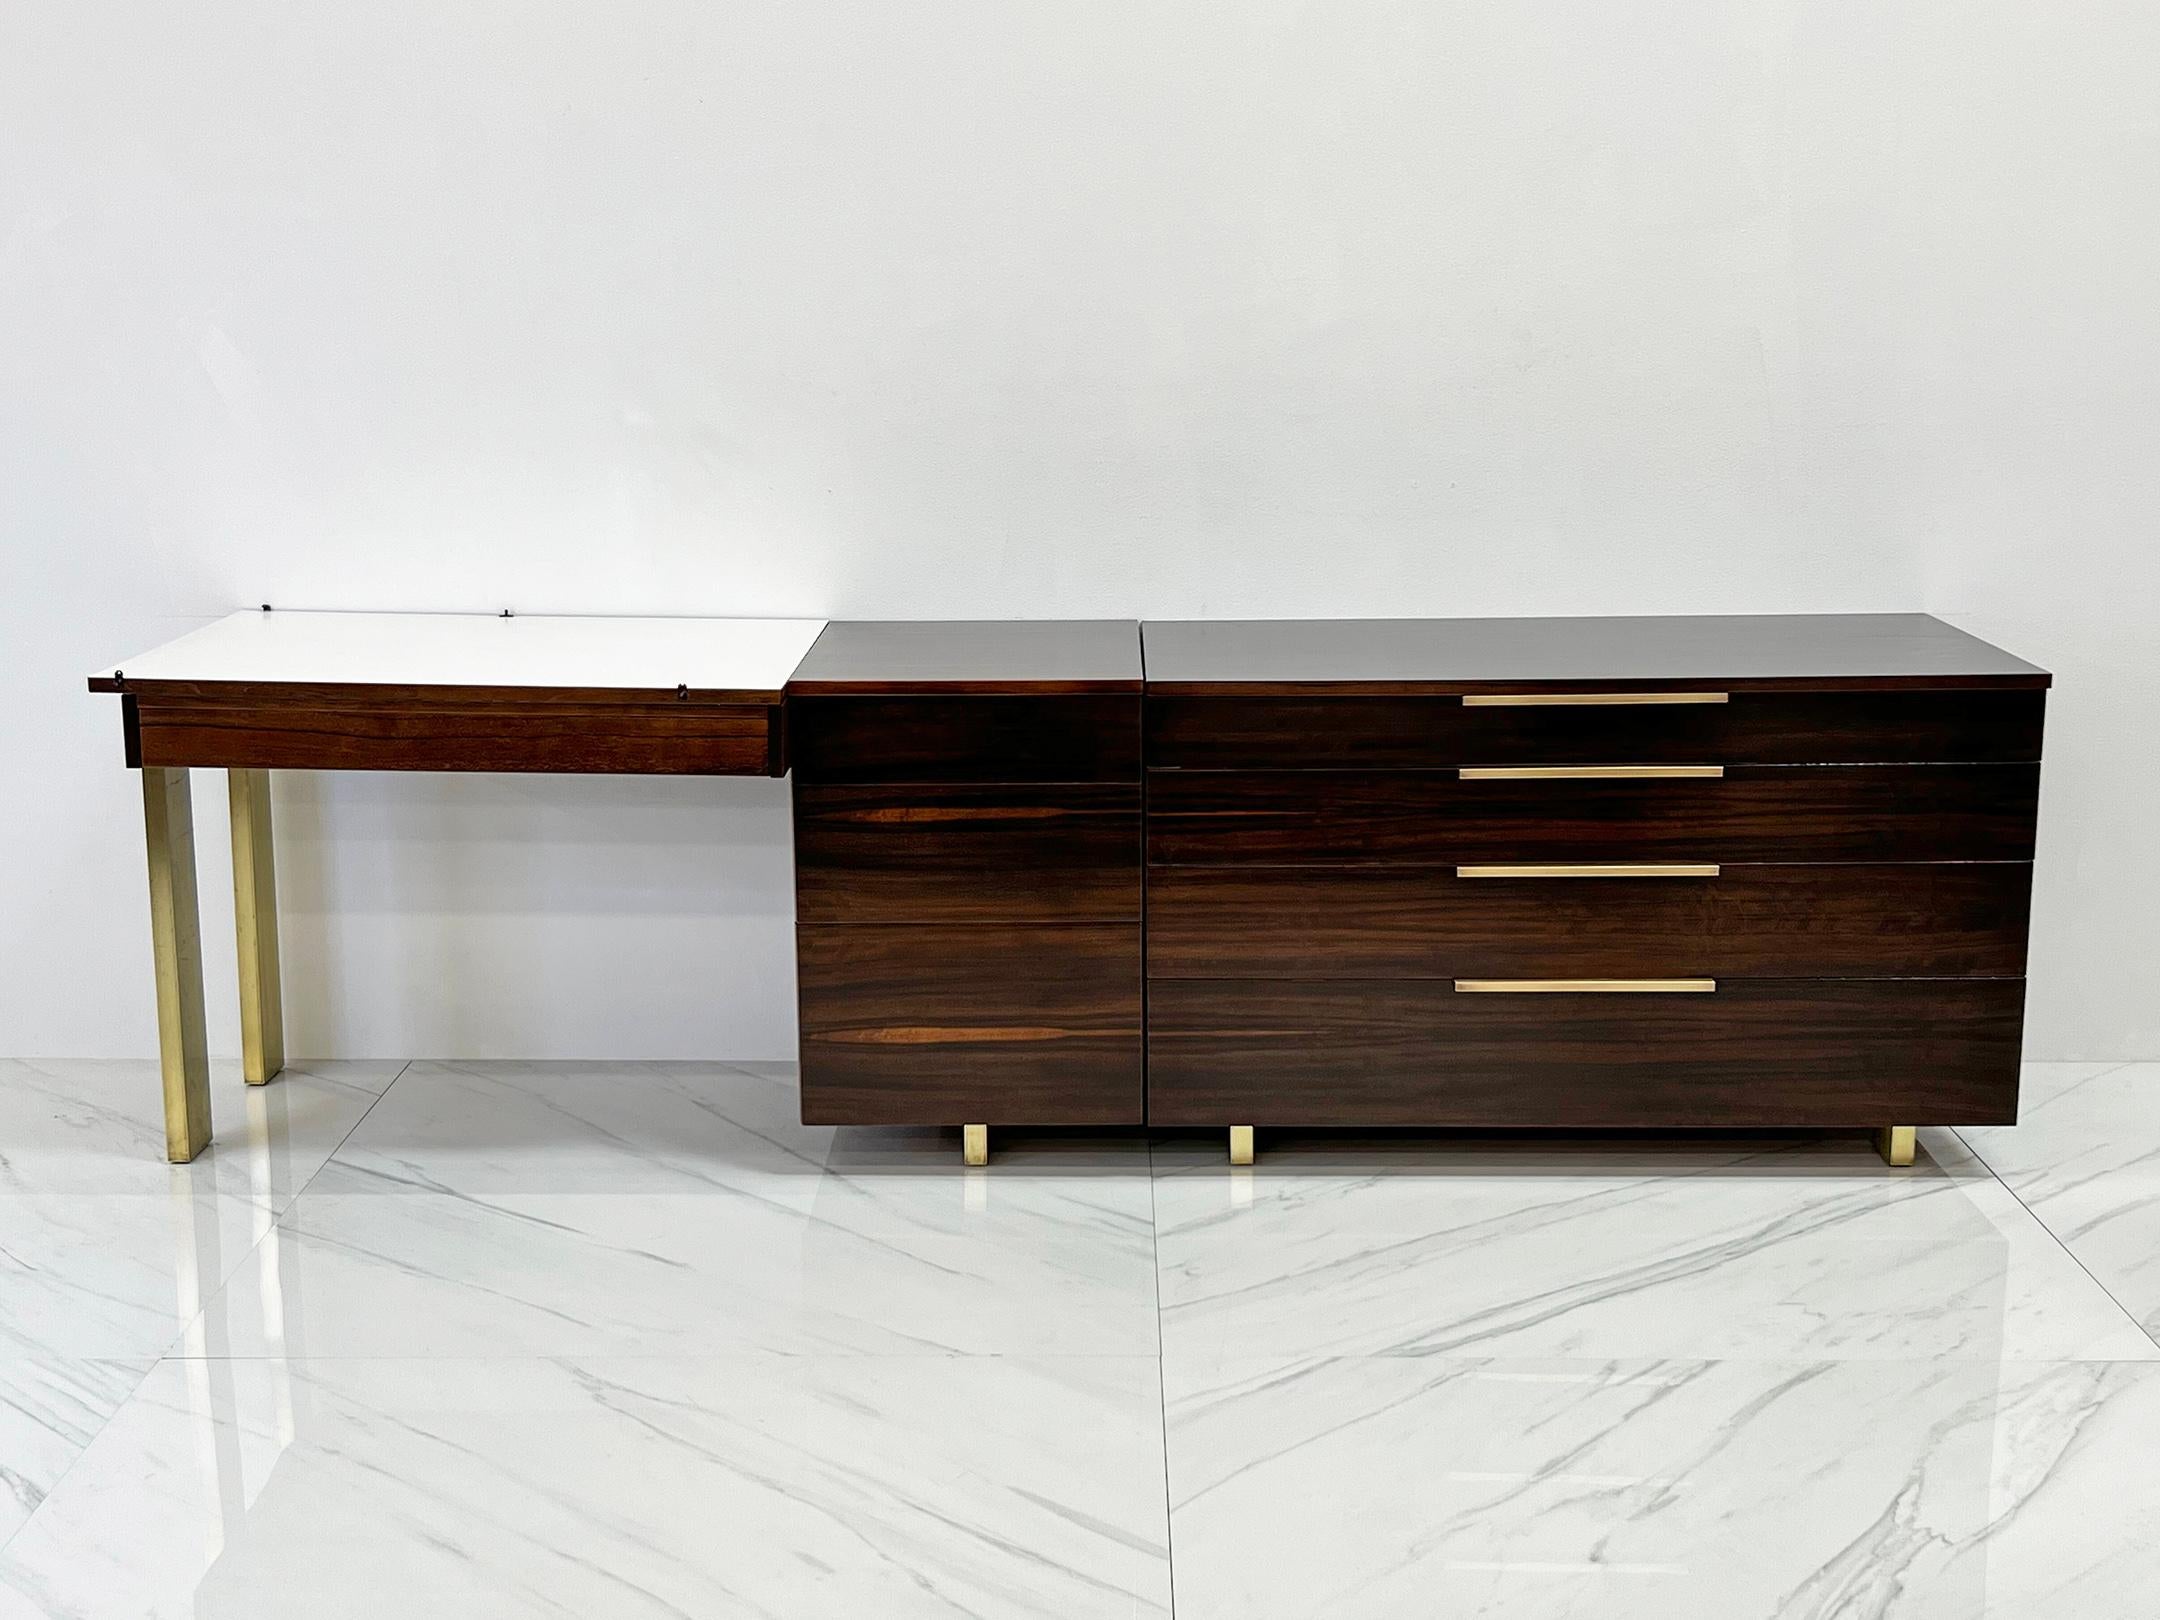 If you're a fan of Vladimir Kagan and are looking for a piece with a story, look no farther. This piece resided in the master bedroom of Vladimir Kagan and Erica Wilson's Park Avenue apartment. This is the Kagan Family Custom Dresser and Desk,